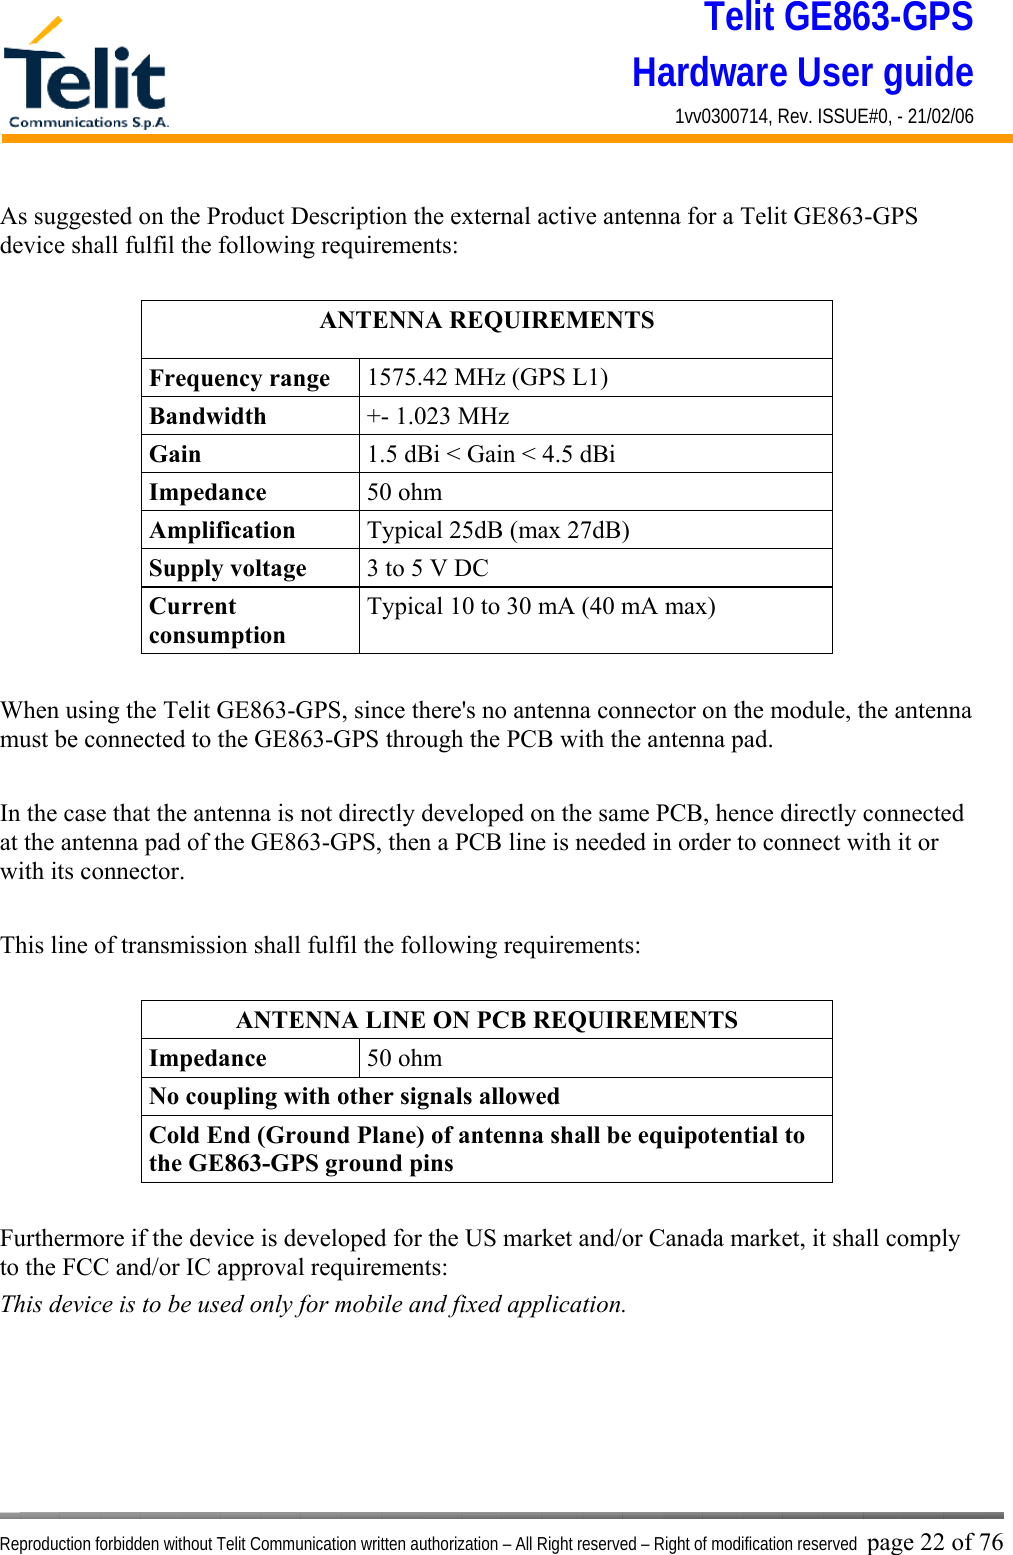 Telit GE863-GPS Hardware User guide 1vv0300714, Rev. ISSUE#0, - 21/02/06    Reproduction forbidden without Telit Communication written authorization – All Right reserved – Right of modification reserved page 22 of 76 As suggested on the Product Description the external active antenna for a Telit GE863-GPS device shall fulfil the following requirements:  ANTENNA REQUIREMENTS Frequency range  1575.42 MHz (GPS L1) Bandwidth  +- 1.023 MHz Gain  1.5 dBi &lt; Gain &lt; 4.5 dBi Impedance  50 ohm Amplification  Typical 25dB (max 27dB) Supply voltage  3 to 5 V DC Current consumption Typical 10 to 30 mA (40 mA max)  When using the Telit GE863-GPS, since there&apos;s no antenna connector on the module, the antenna must be connected to the GE863-GPS through the PCB with the antenna pad.  In the case that the antenna is not directly developed on the same PCB, hence directly connected at the antenna pad of the GE863-GPS, then a PCB line is needed in order to connect with it or with its connector.   This line of transmission shall fulfil the following requirements:  ANTENNA LINE ON PCB REQUIREMENTS Impedance  50 ohm No coupling with other signals allowed Cold End (Ground Plane) of antenna shall be equipotential to the GE863-GPS ground pins  Furthermore if the device is developed for the US market and/or Canada market, it shall comply to the FCC and/or IC approval requirements: This device is to be used only for mobile and fixed application.  